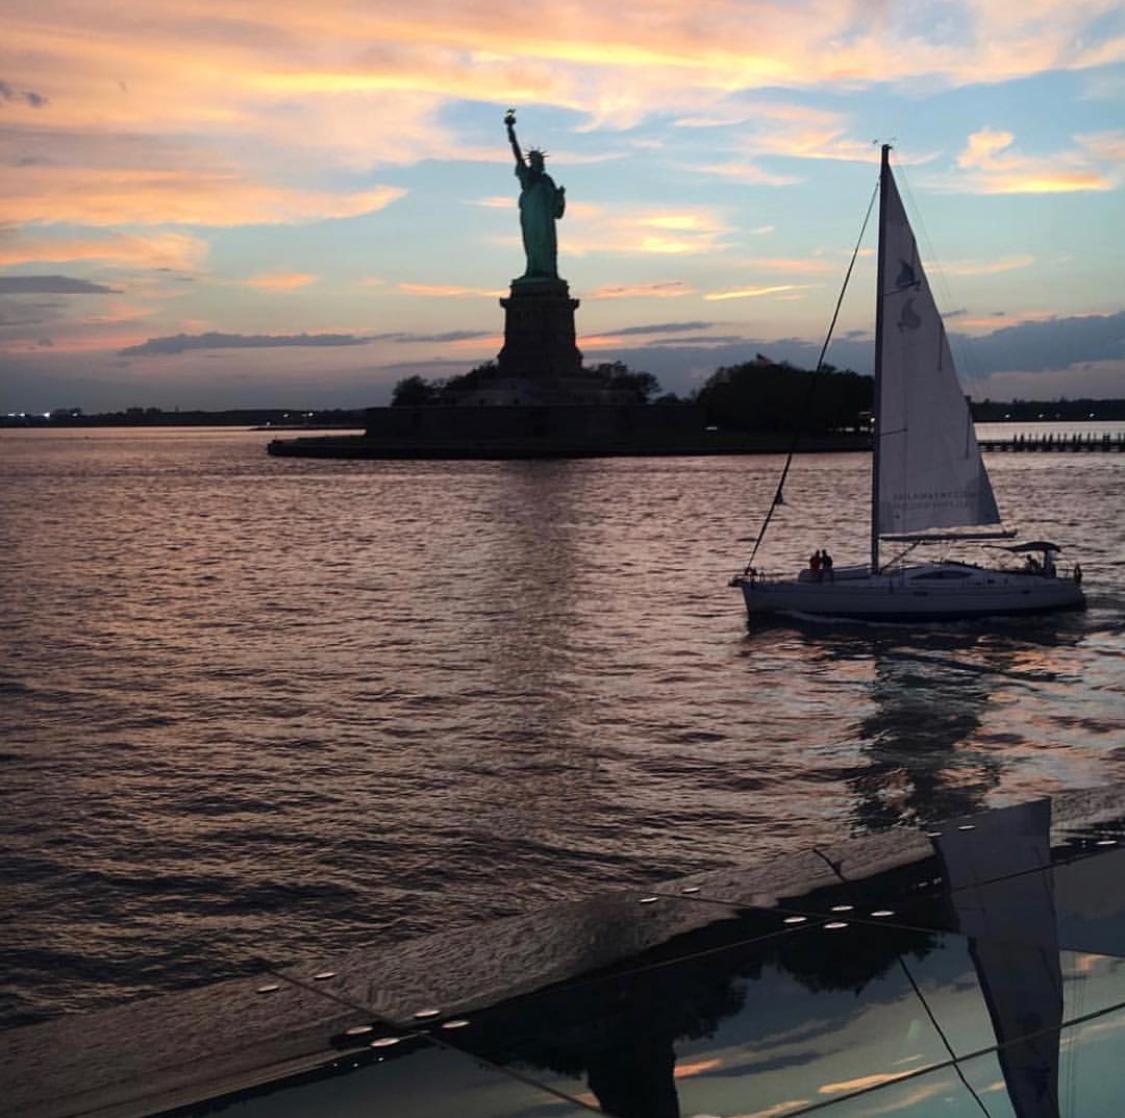 NYC Private Yacht Cruise Boat Party (Indoor) - Rentals 7 Days a Week